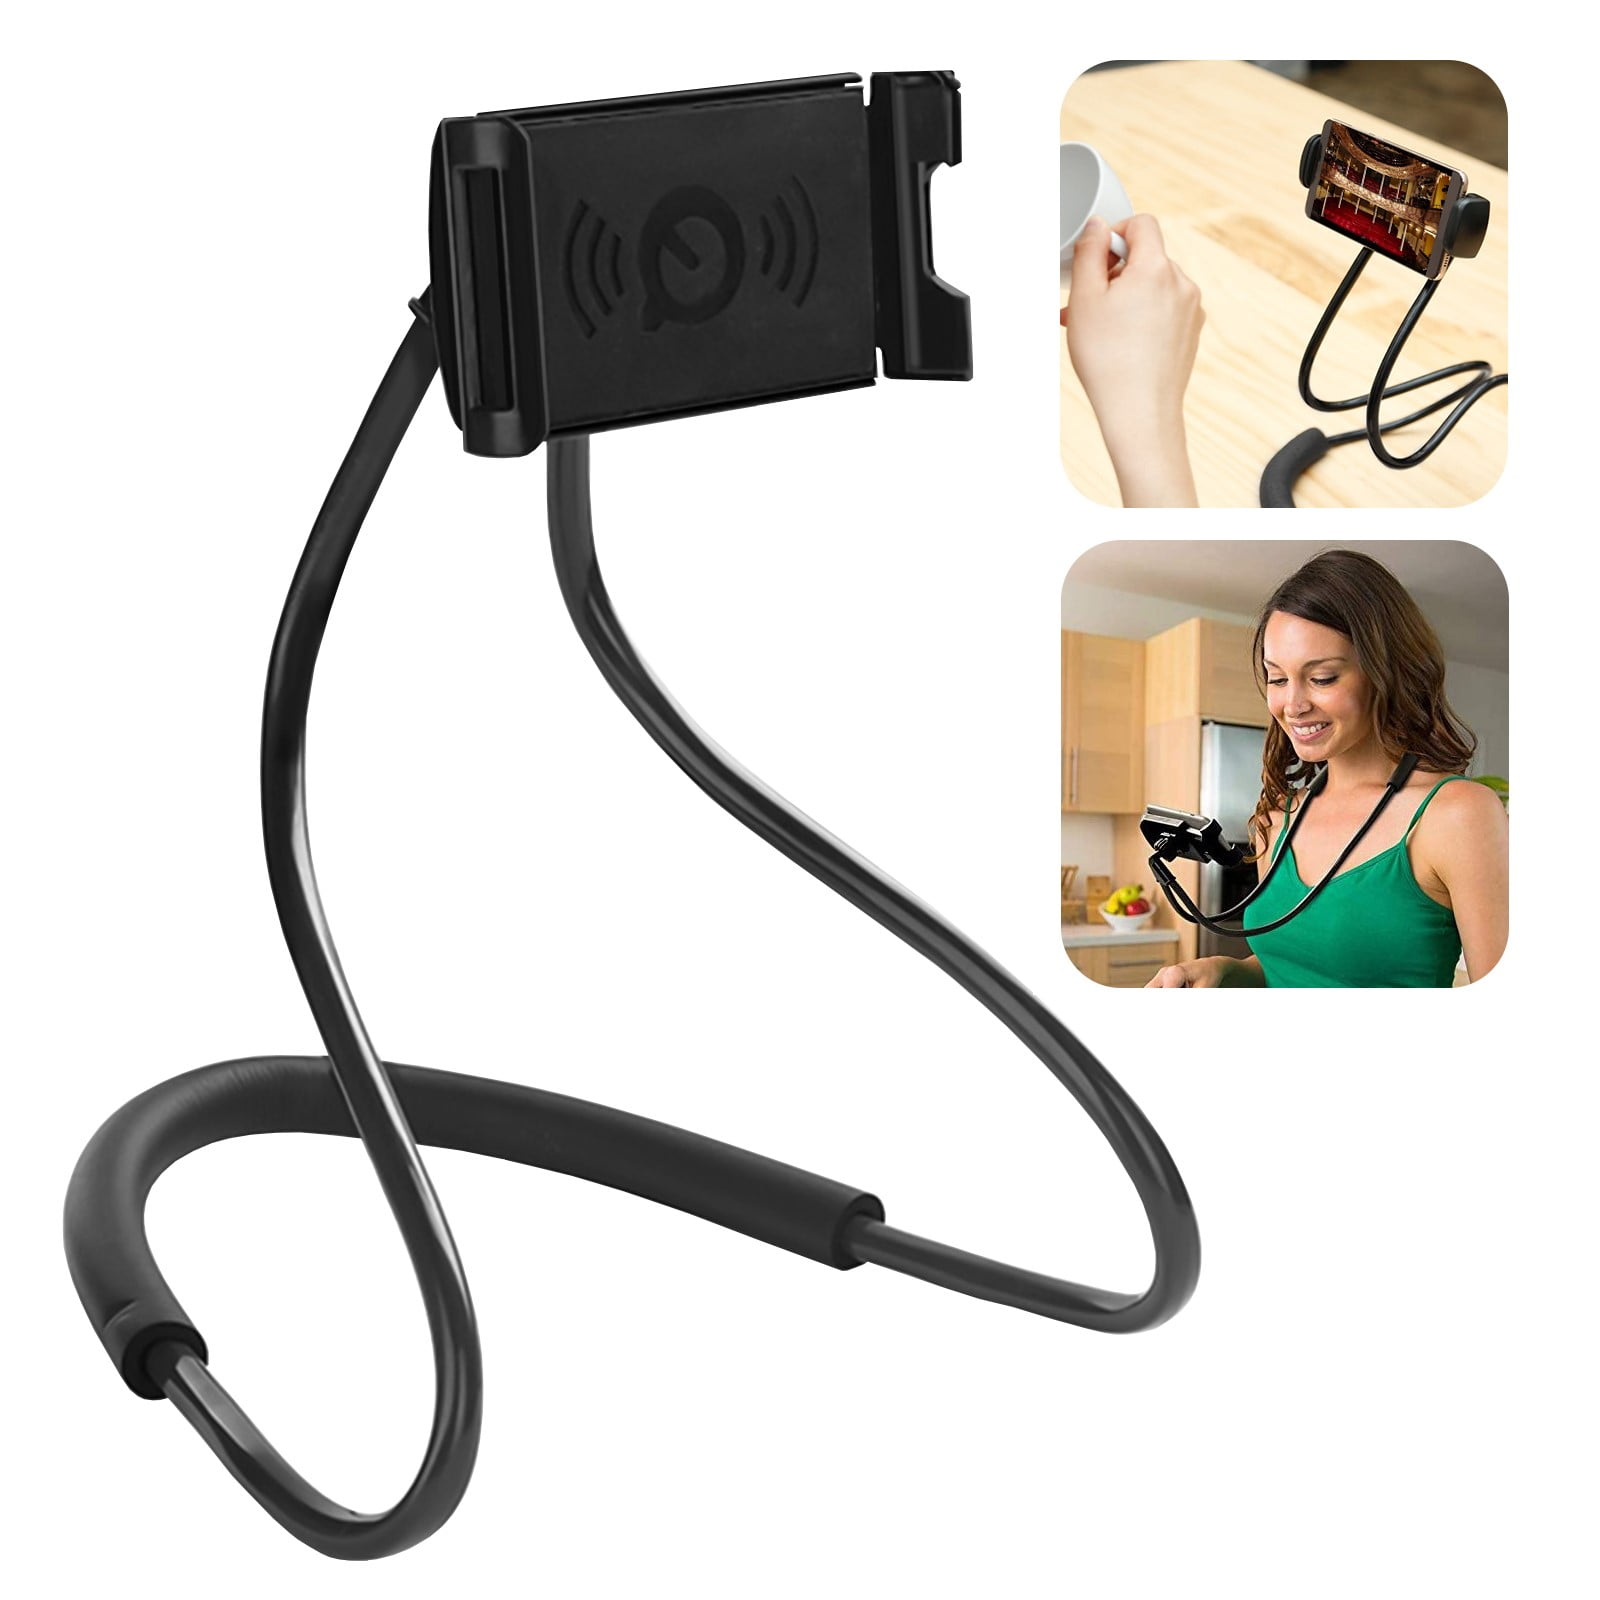 White Flexible Arms Clip Cellphone Mount Cradle Smartphone Lazy Bracket Foldable & Adjustable Cell Phone Clip Holder Super Stable Desktop Mobile Phone Stand w/Anti-Shock & Anti-Slip Cushion